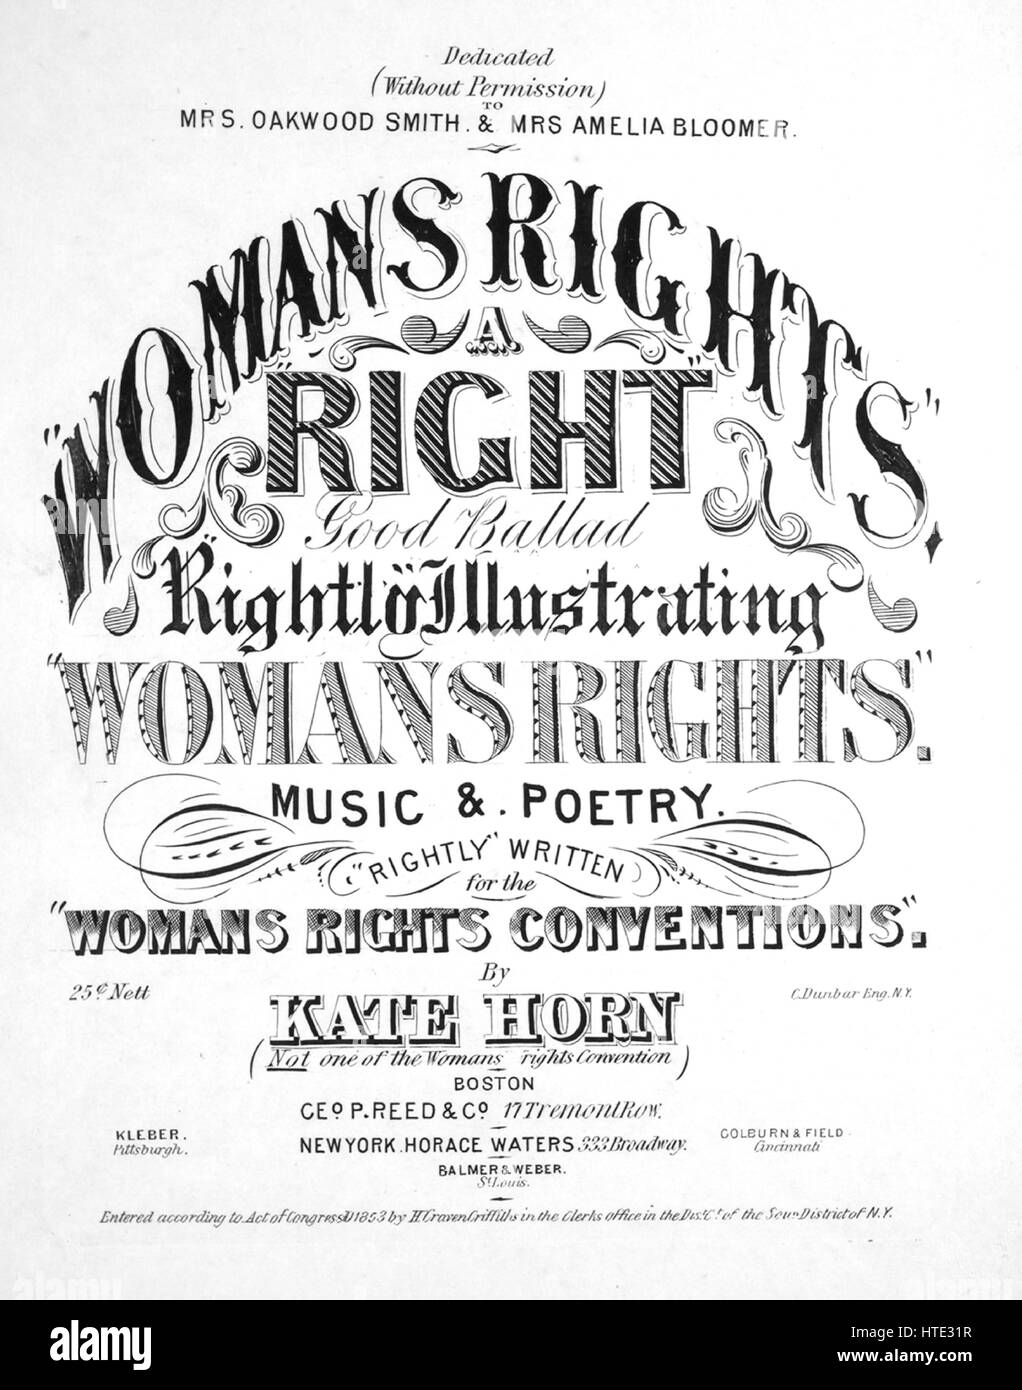 Sheet music cover image of the song 'Woman's Rights A Right Good Ballad Rightly Illustrating 'Womans Rights'', with original authorship notes reading 'Music and Poetry 'Rightly Written' for the 'Womans Rights Conventions' By Kate Horn', United States, 1853. The publisher is listed as 'Geo. P. Reed and Co., 17 Tremont Row', the form of composition is 'strophic', the instrumentation is 'piano and voice', the first line reads 'Since many wish to hear in verse what I think woman's rights', and the illustration artist is listed as 'C. Dunbar Eng. N.Y.; G.W. Ackerman Eng. and Pr.'. Stock Photo